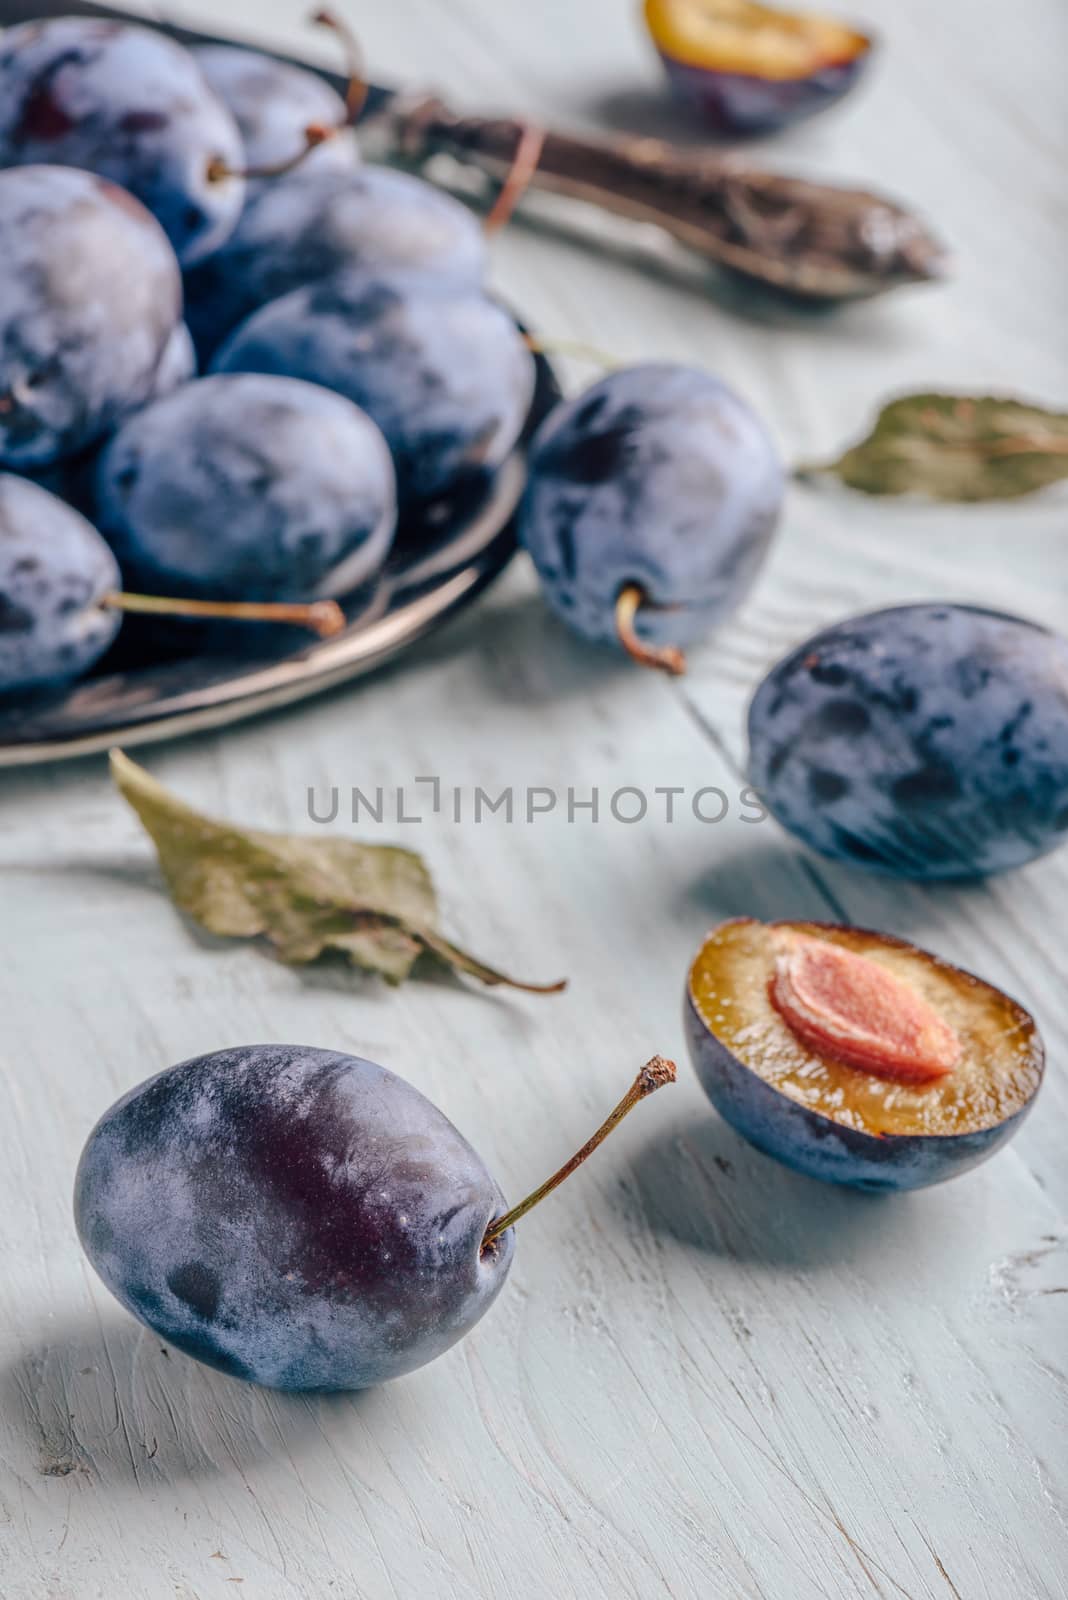 Plums with leaves and knife over wooden surface by Seva_blsv